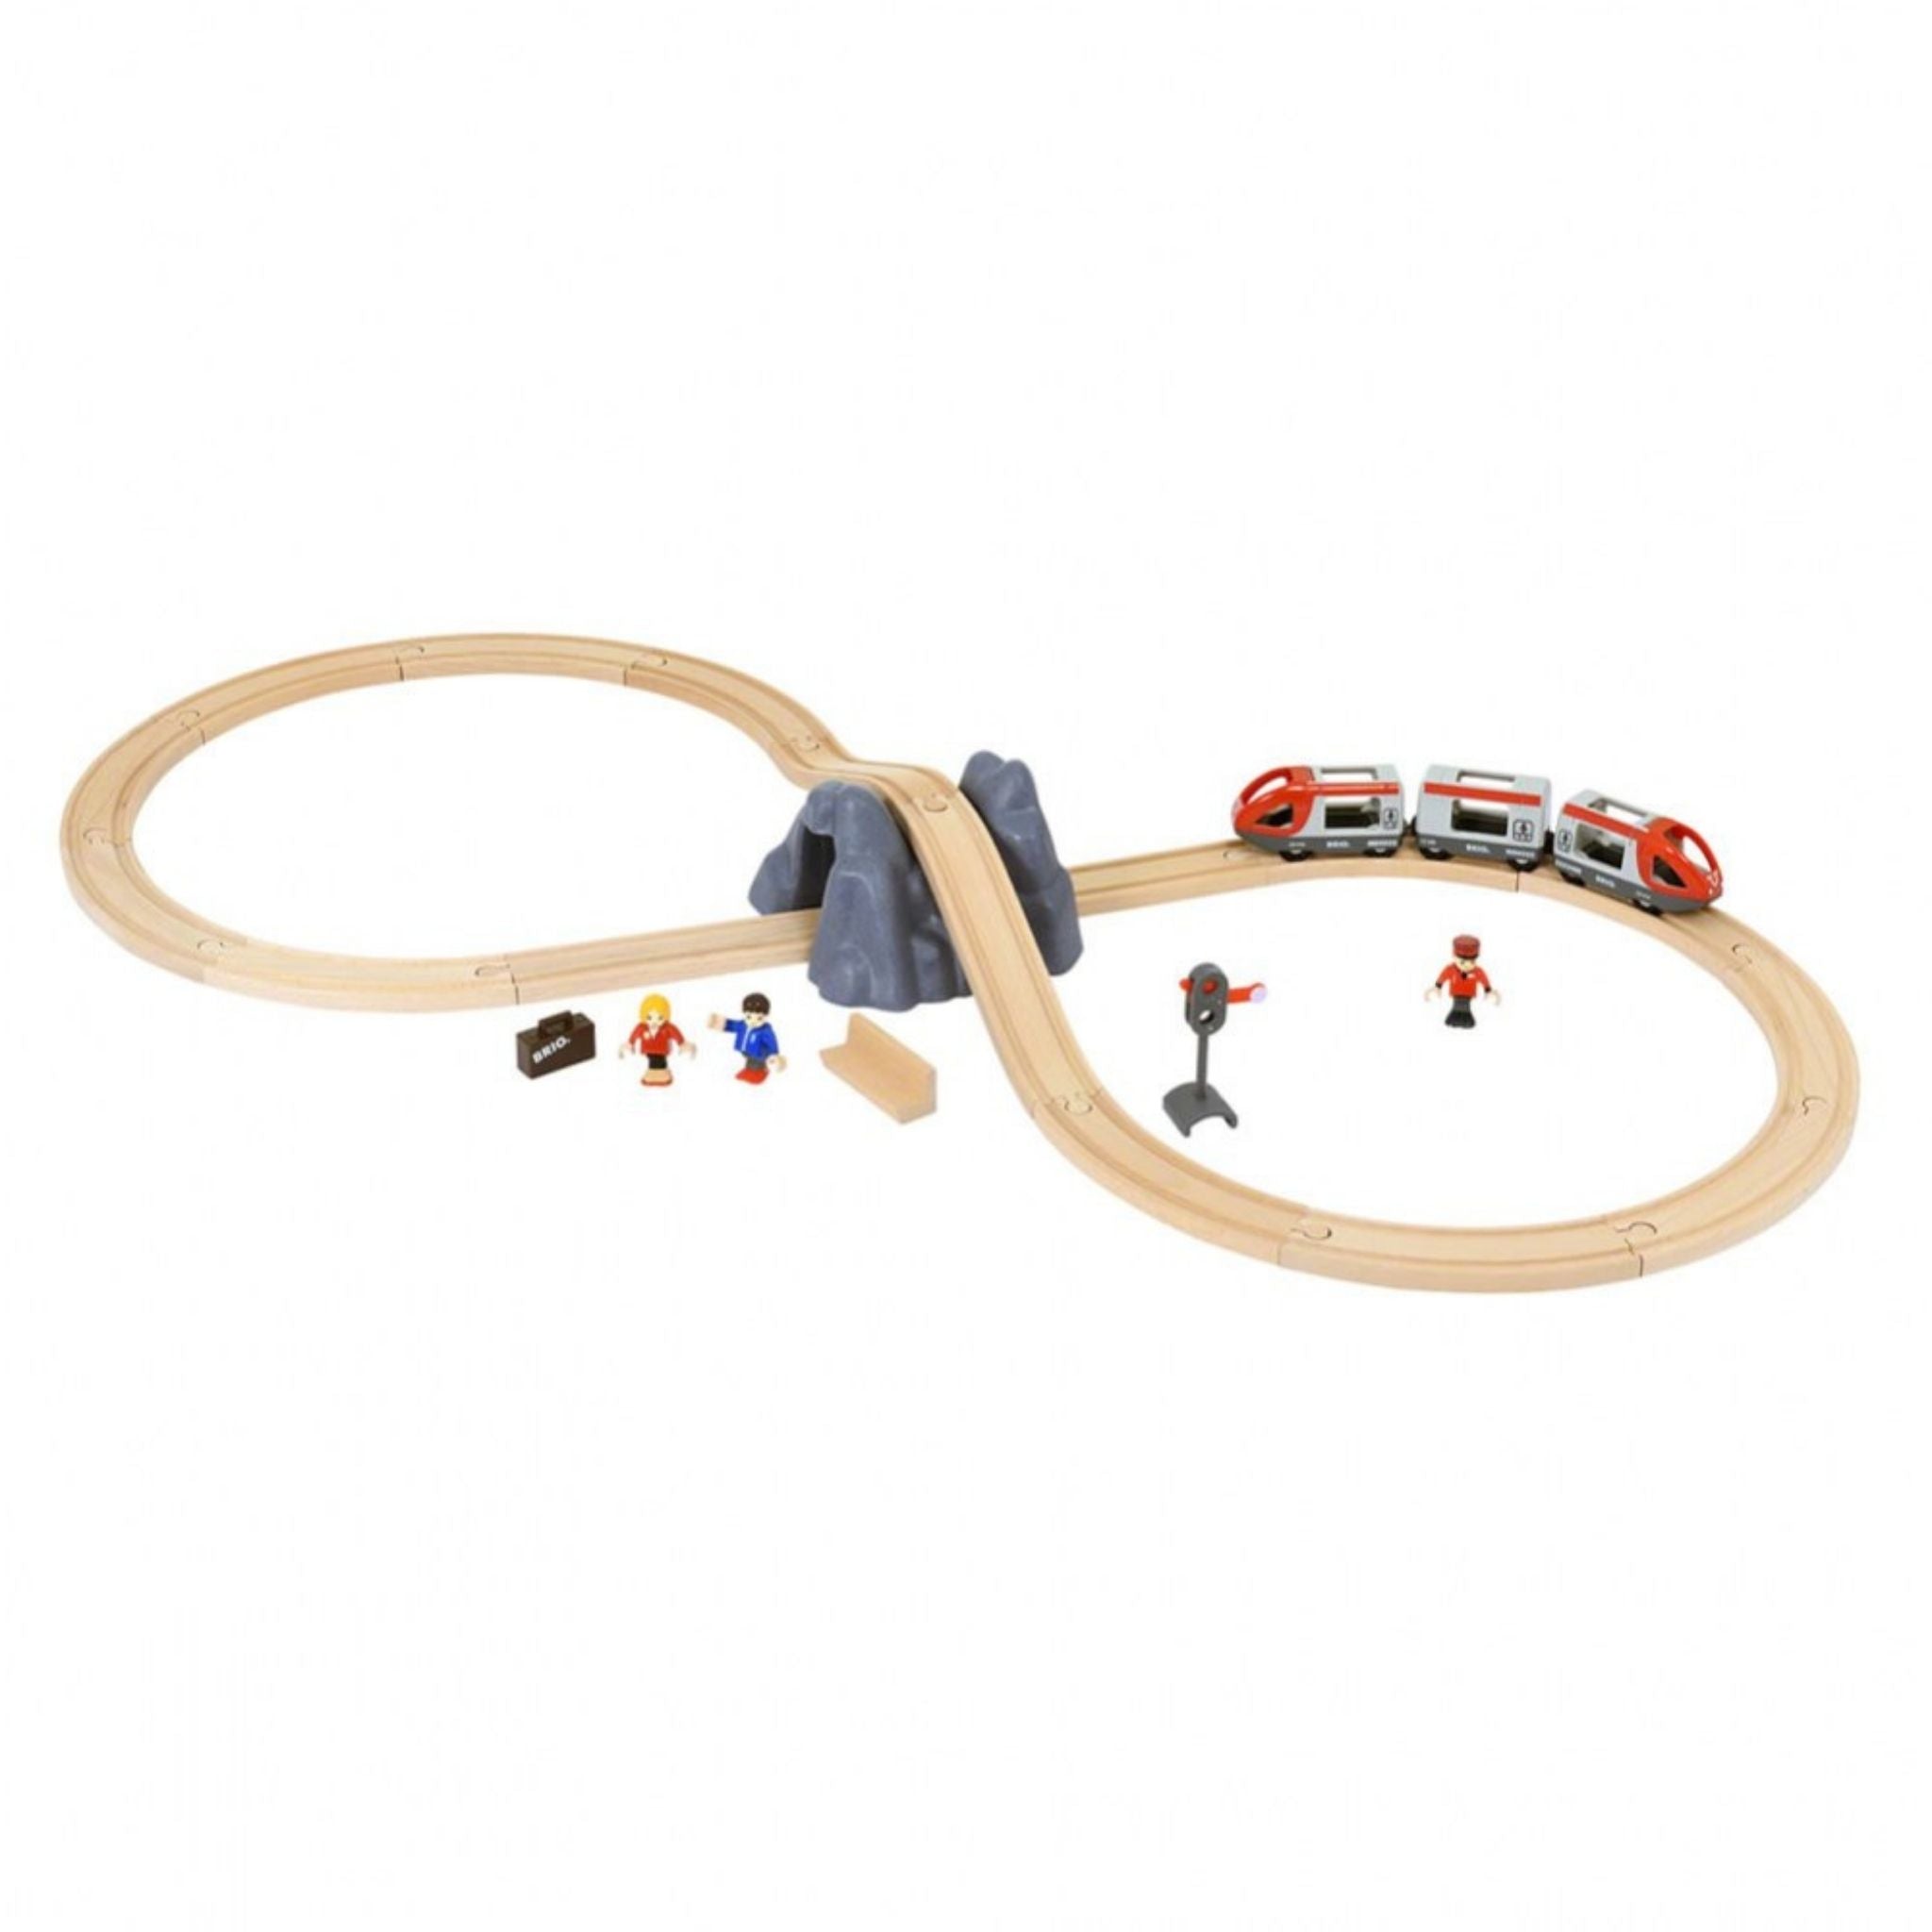  Brio World 33052 Deluxe Railway Set  Wooden Toy Train Set for  Kids Age 3 and Up, Green : Toys & Games